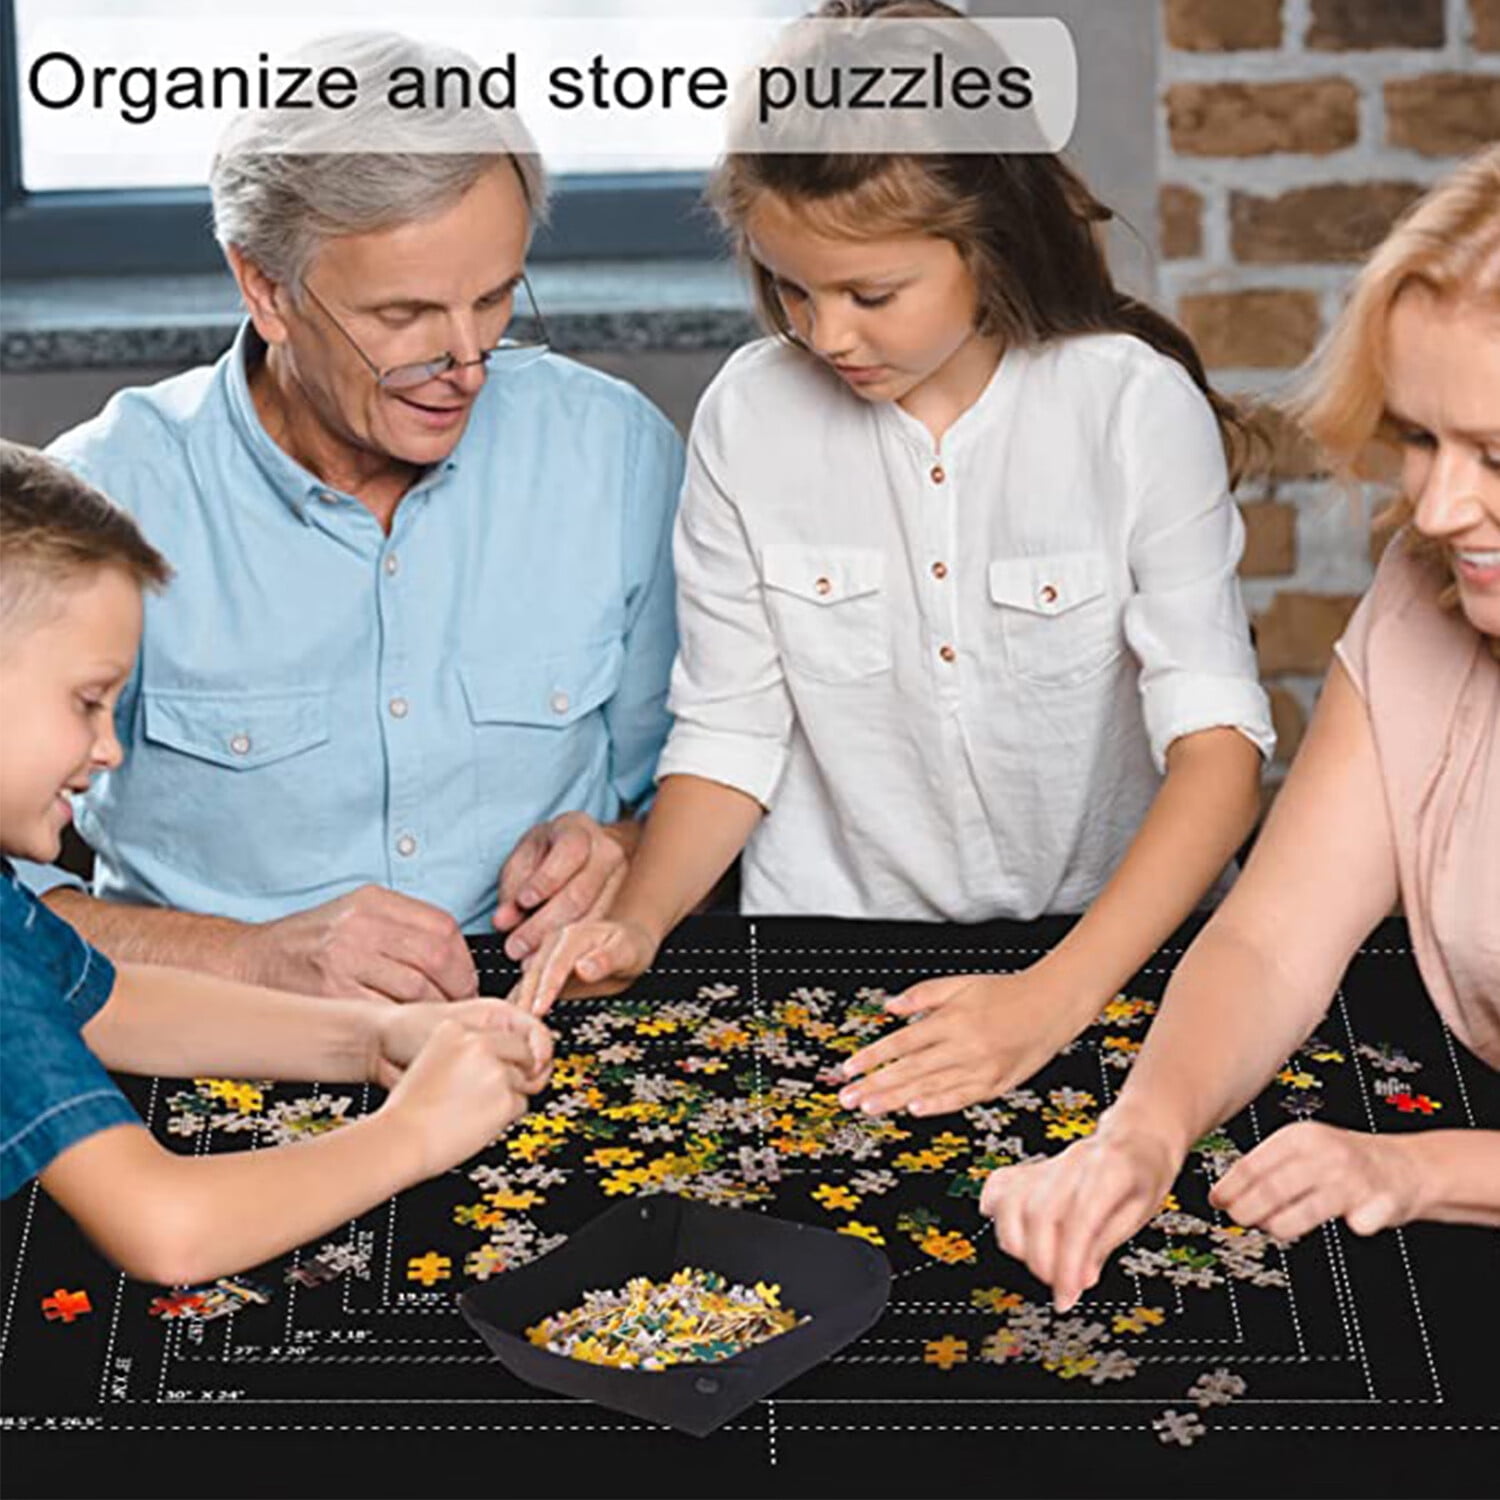  Jigsaw Puzzle Board 1000 500 Pieces, Portable 6 Storage Sorting  Tray Table Mat Holder Large Puzzles Organizer Gift Keeper Pad Saver with 6  Case Accessories Frame Glue Sorter Sheets Adults Kids